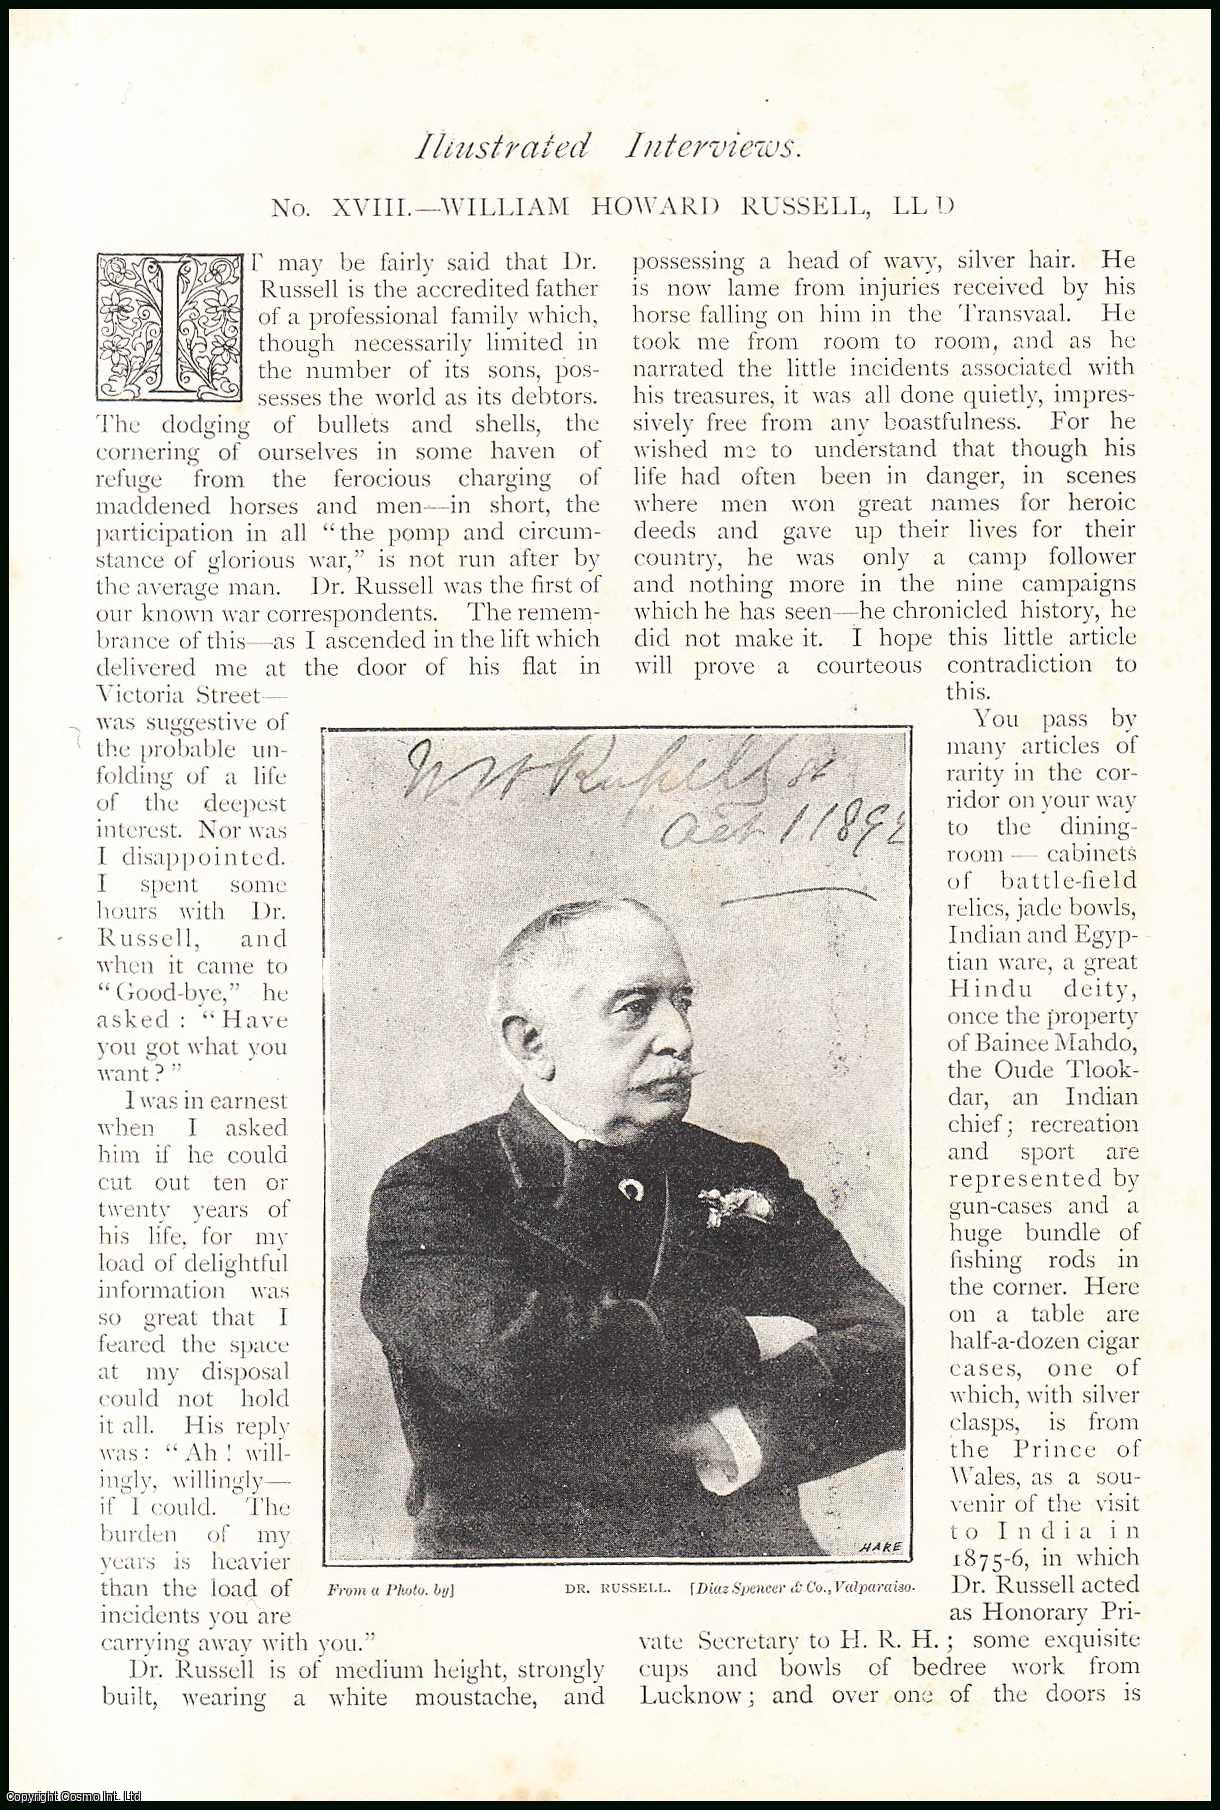 Harry How - Dr. William Howard Russell, Irish Reporter. Illustrated Interviews. An original article from The Strand Magazine, 1892.